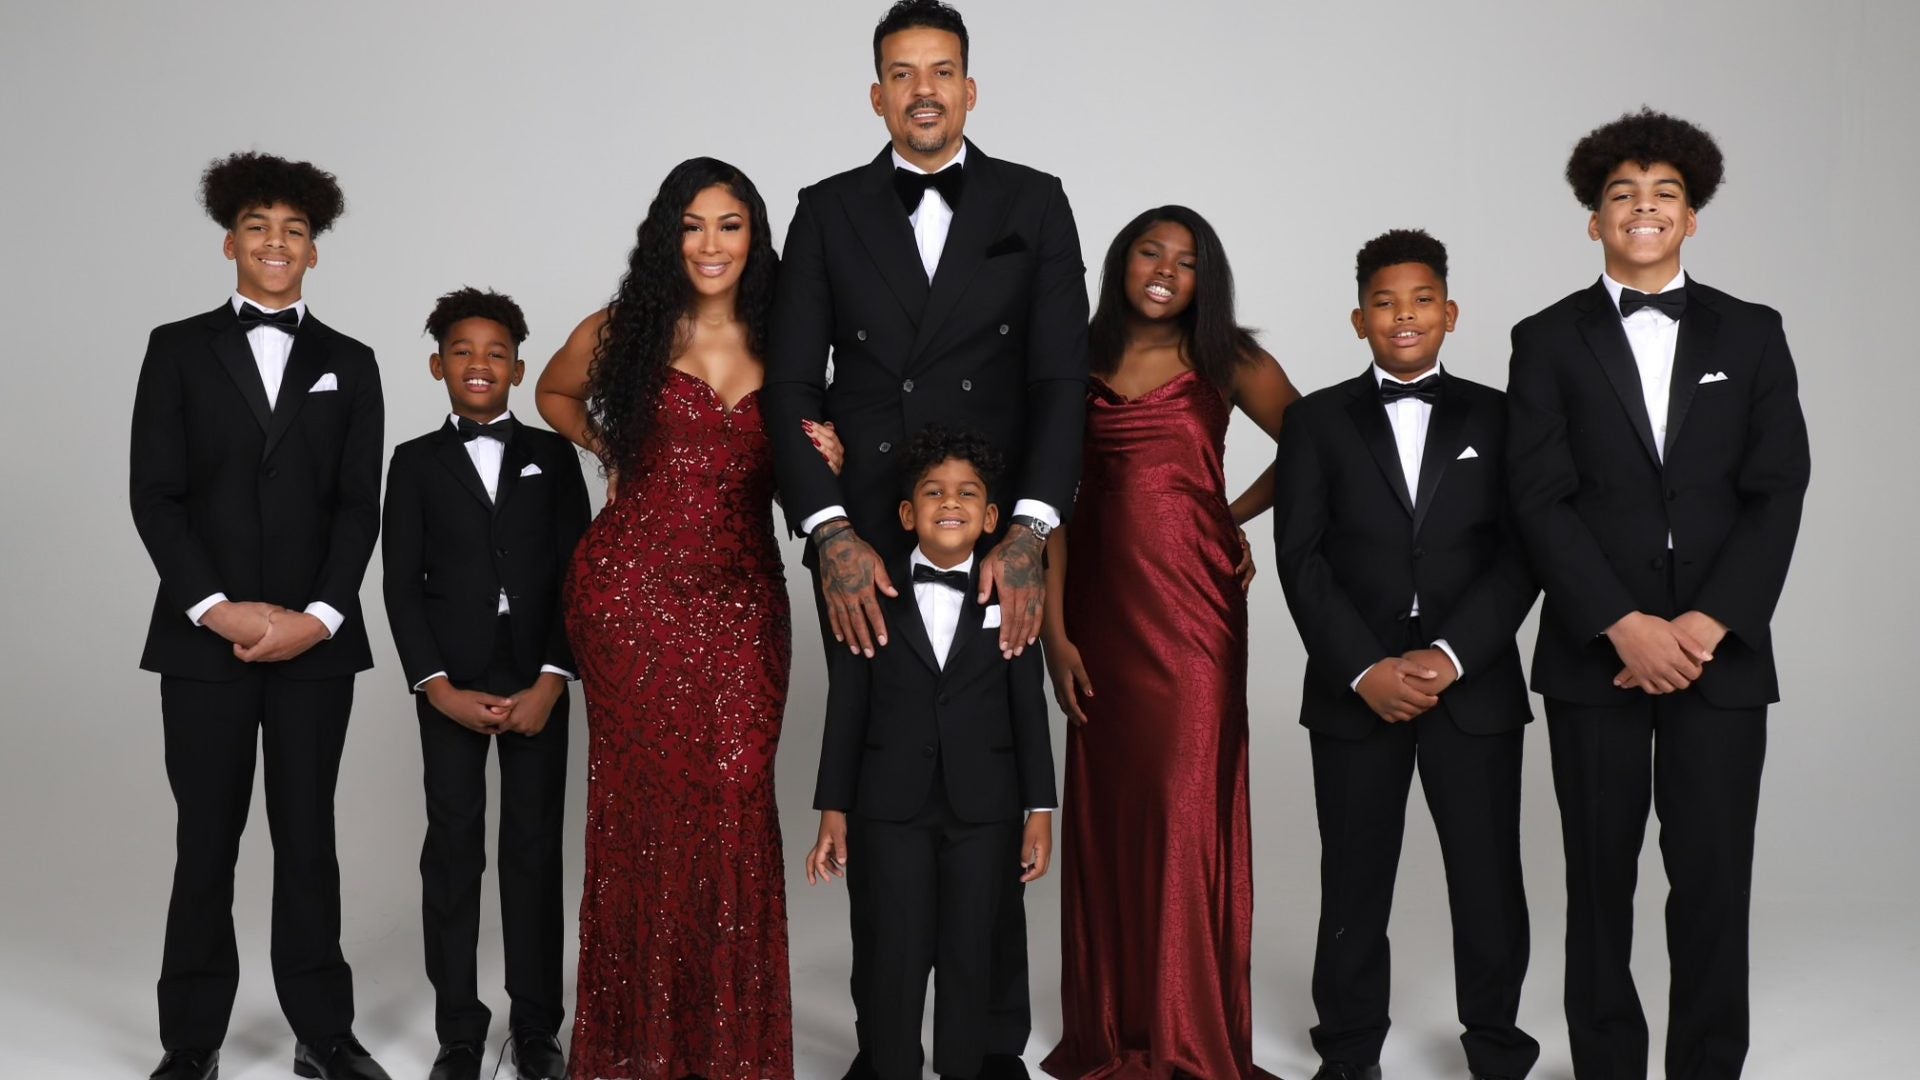 Matt Barnes, Anansa Sims And Their Blended Family Of Eight To Star In WE TV Series, 'The Barnes Bunch'